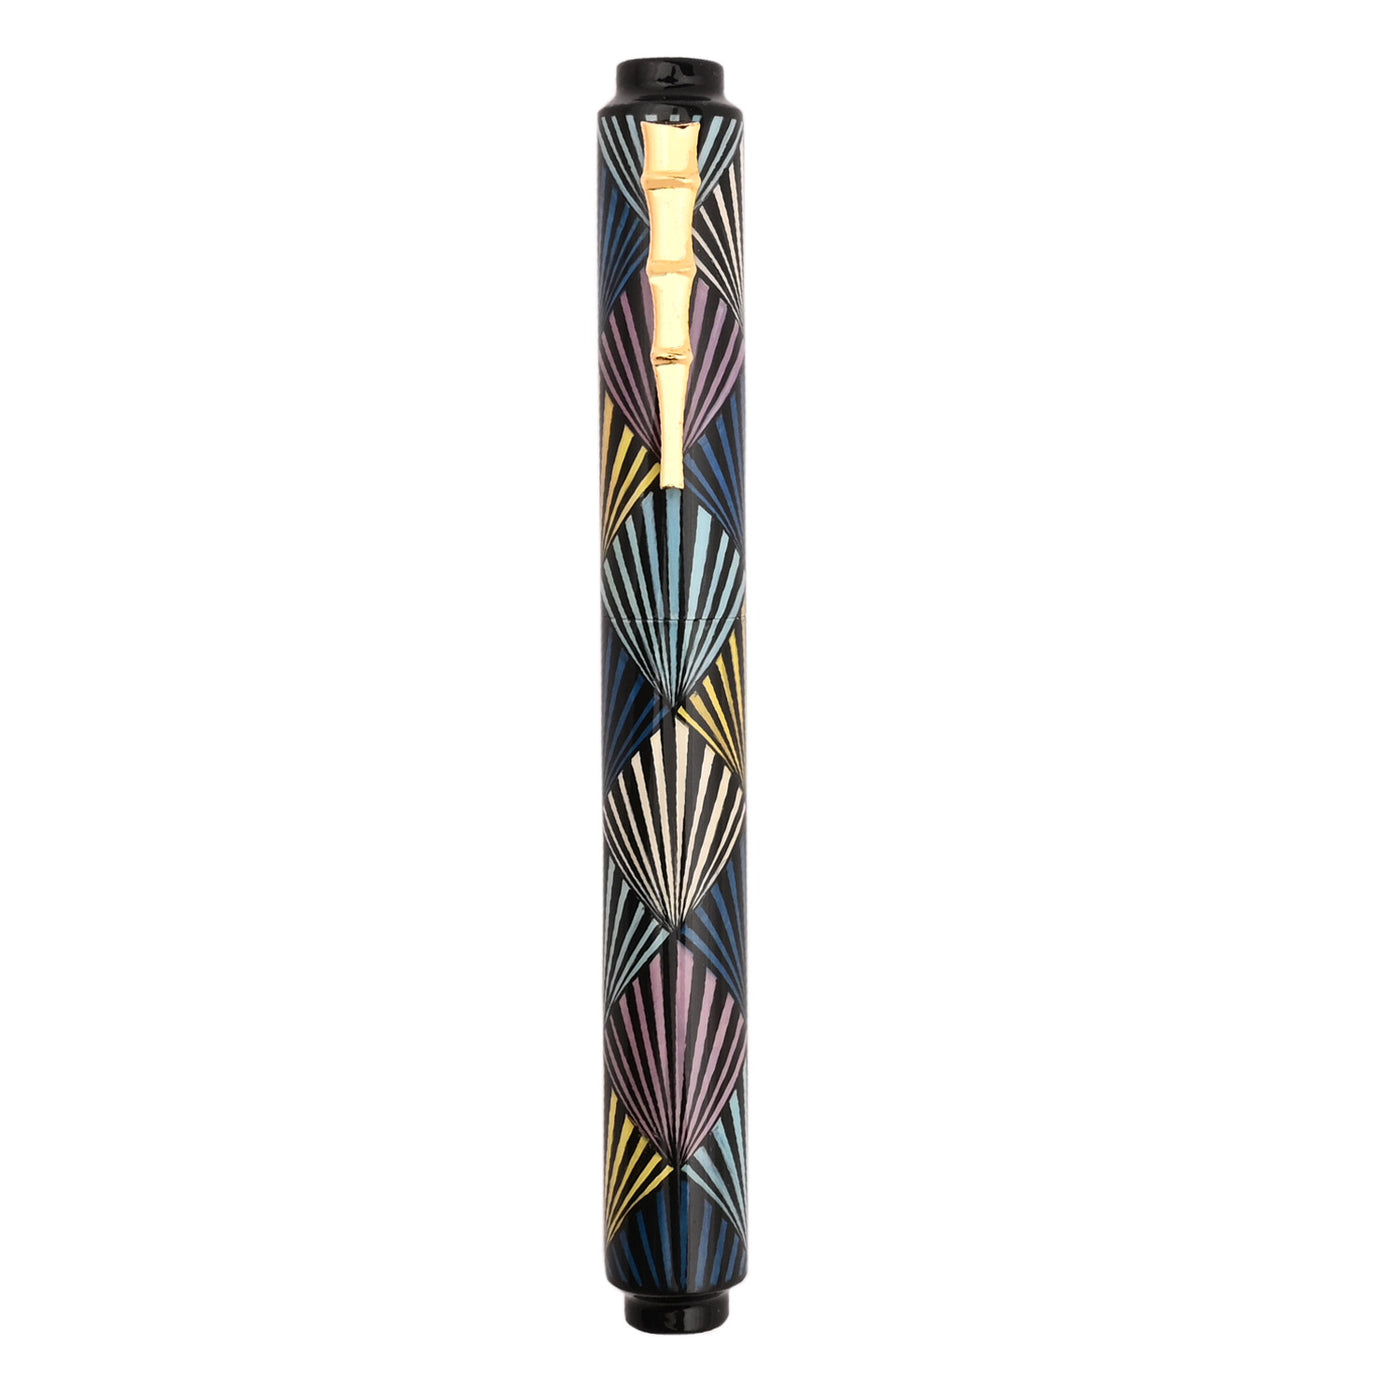 AP Limited Editions Russian Lacquer Art Fountain Pen - An Ode to Art Deco 4